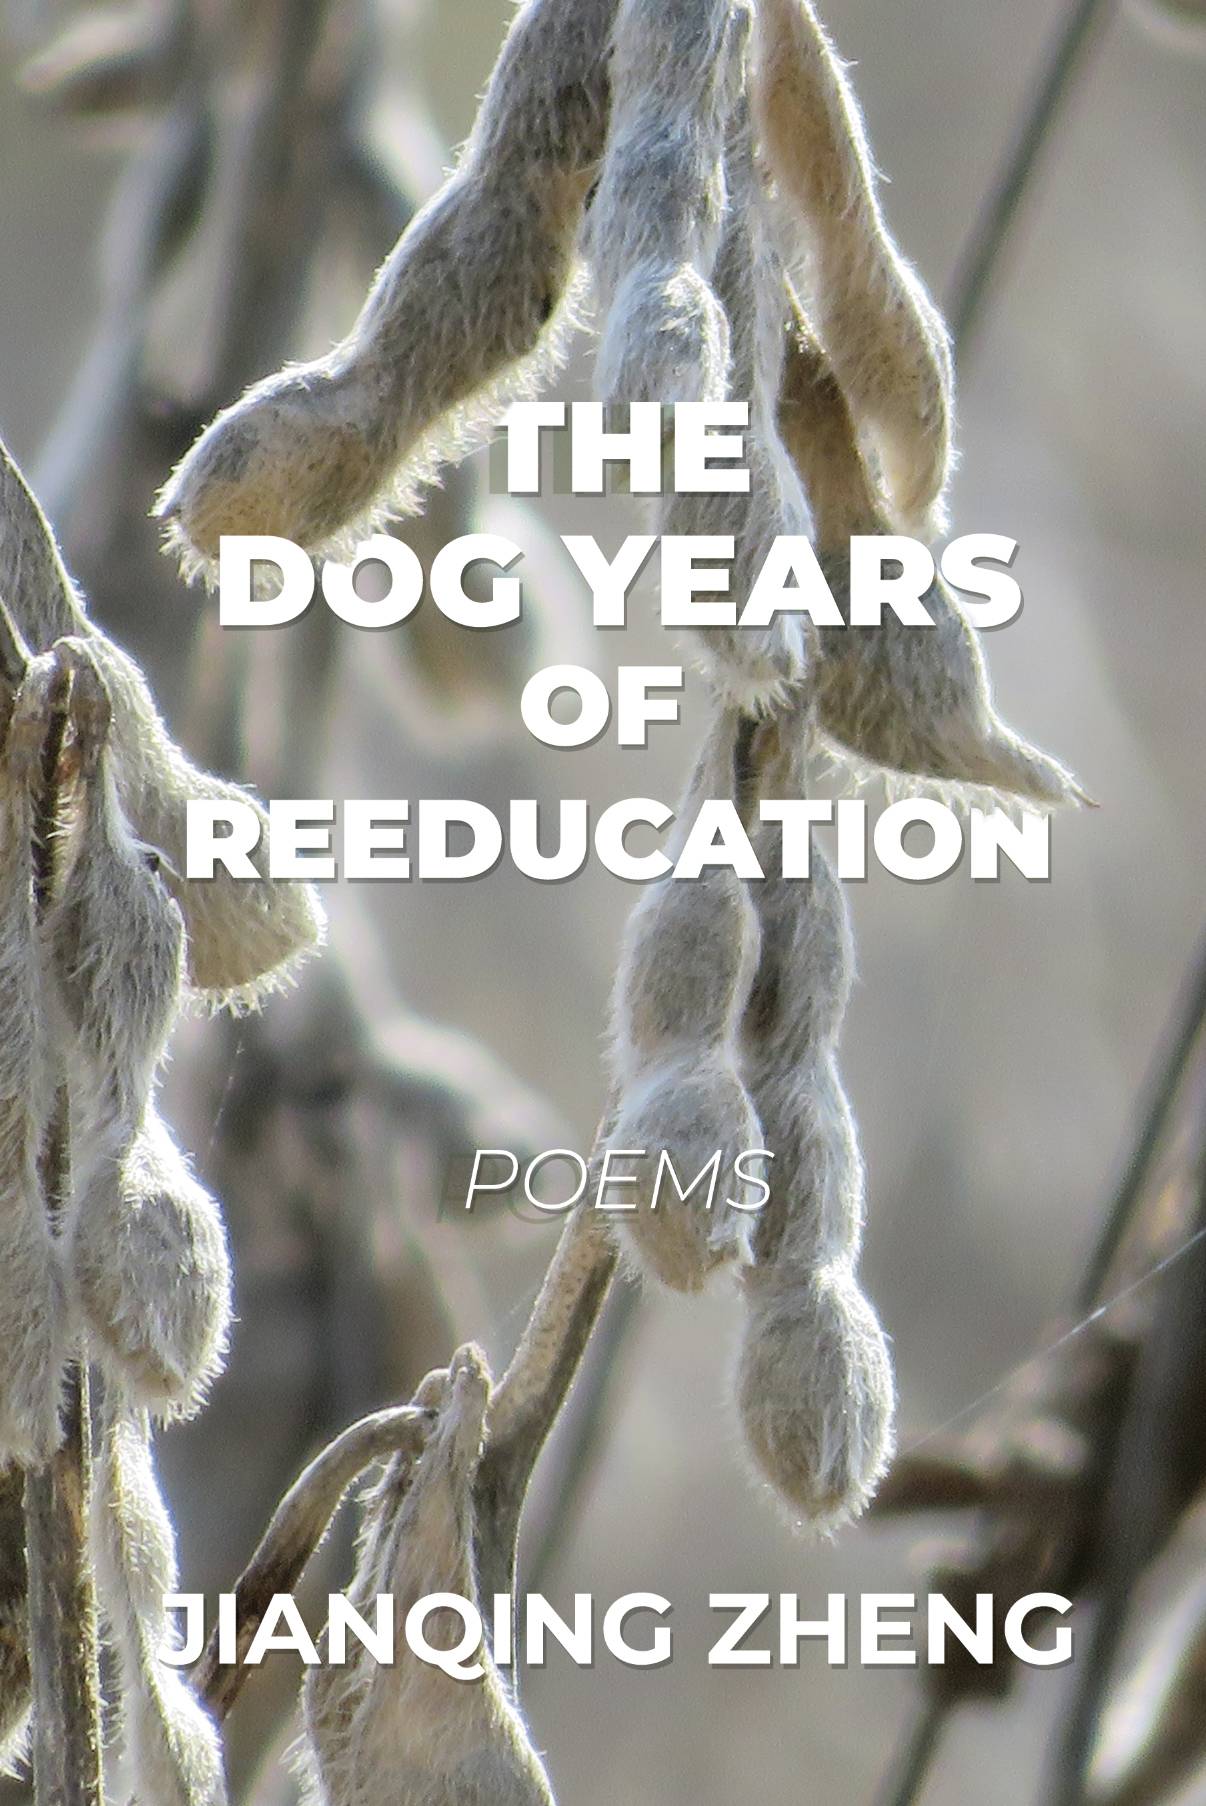 The Dog Years of Reeducation Poems by Jianqing Zheng. Cover shows a close-up photo of soybeans drying in the field. The colors are brown and beige.